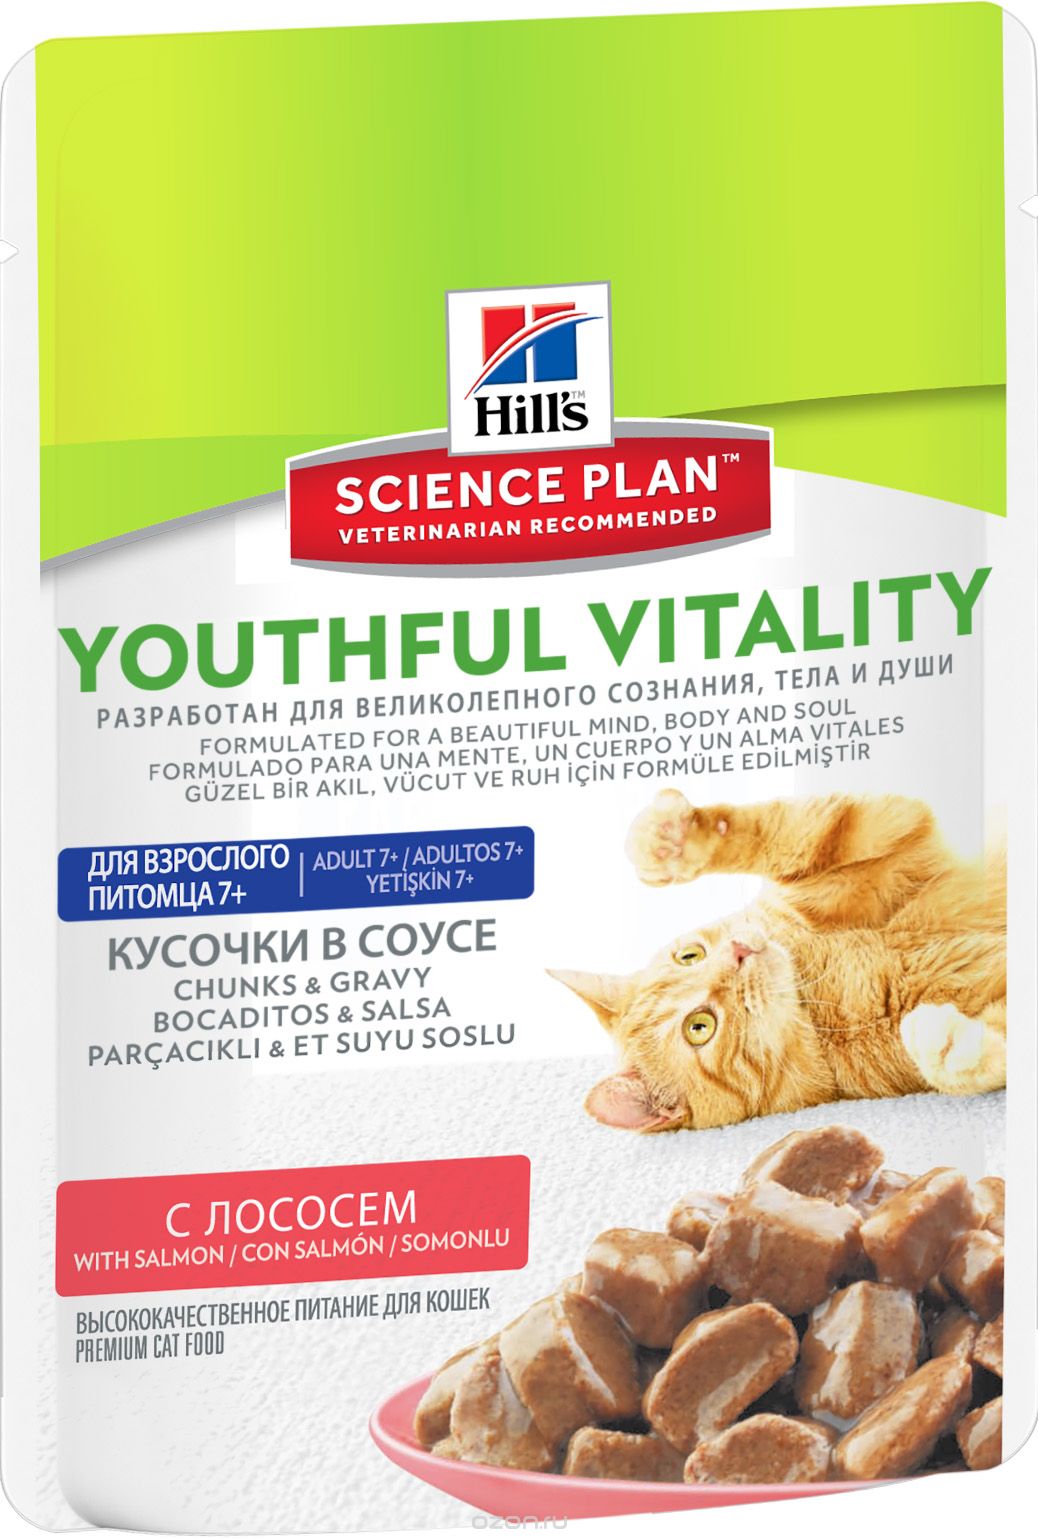   Hill's Science Plan Youthful Vitality    7 ,  , 12   85 